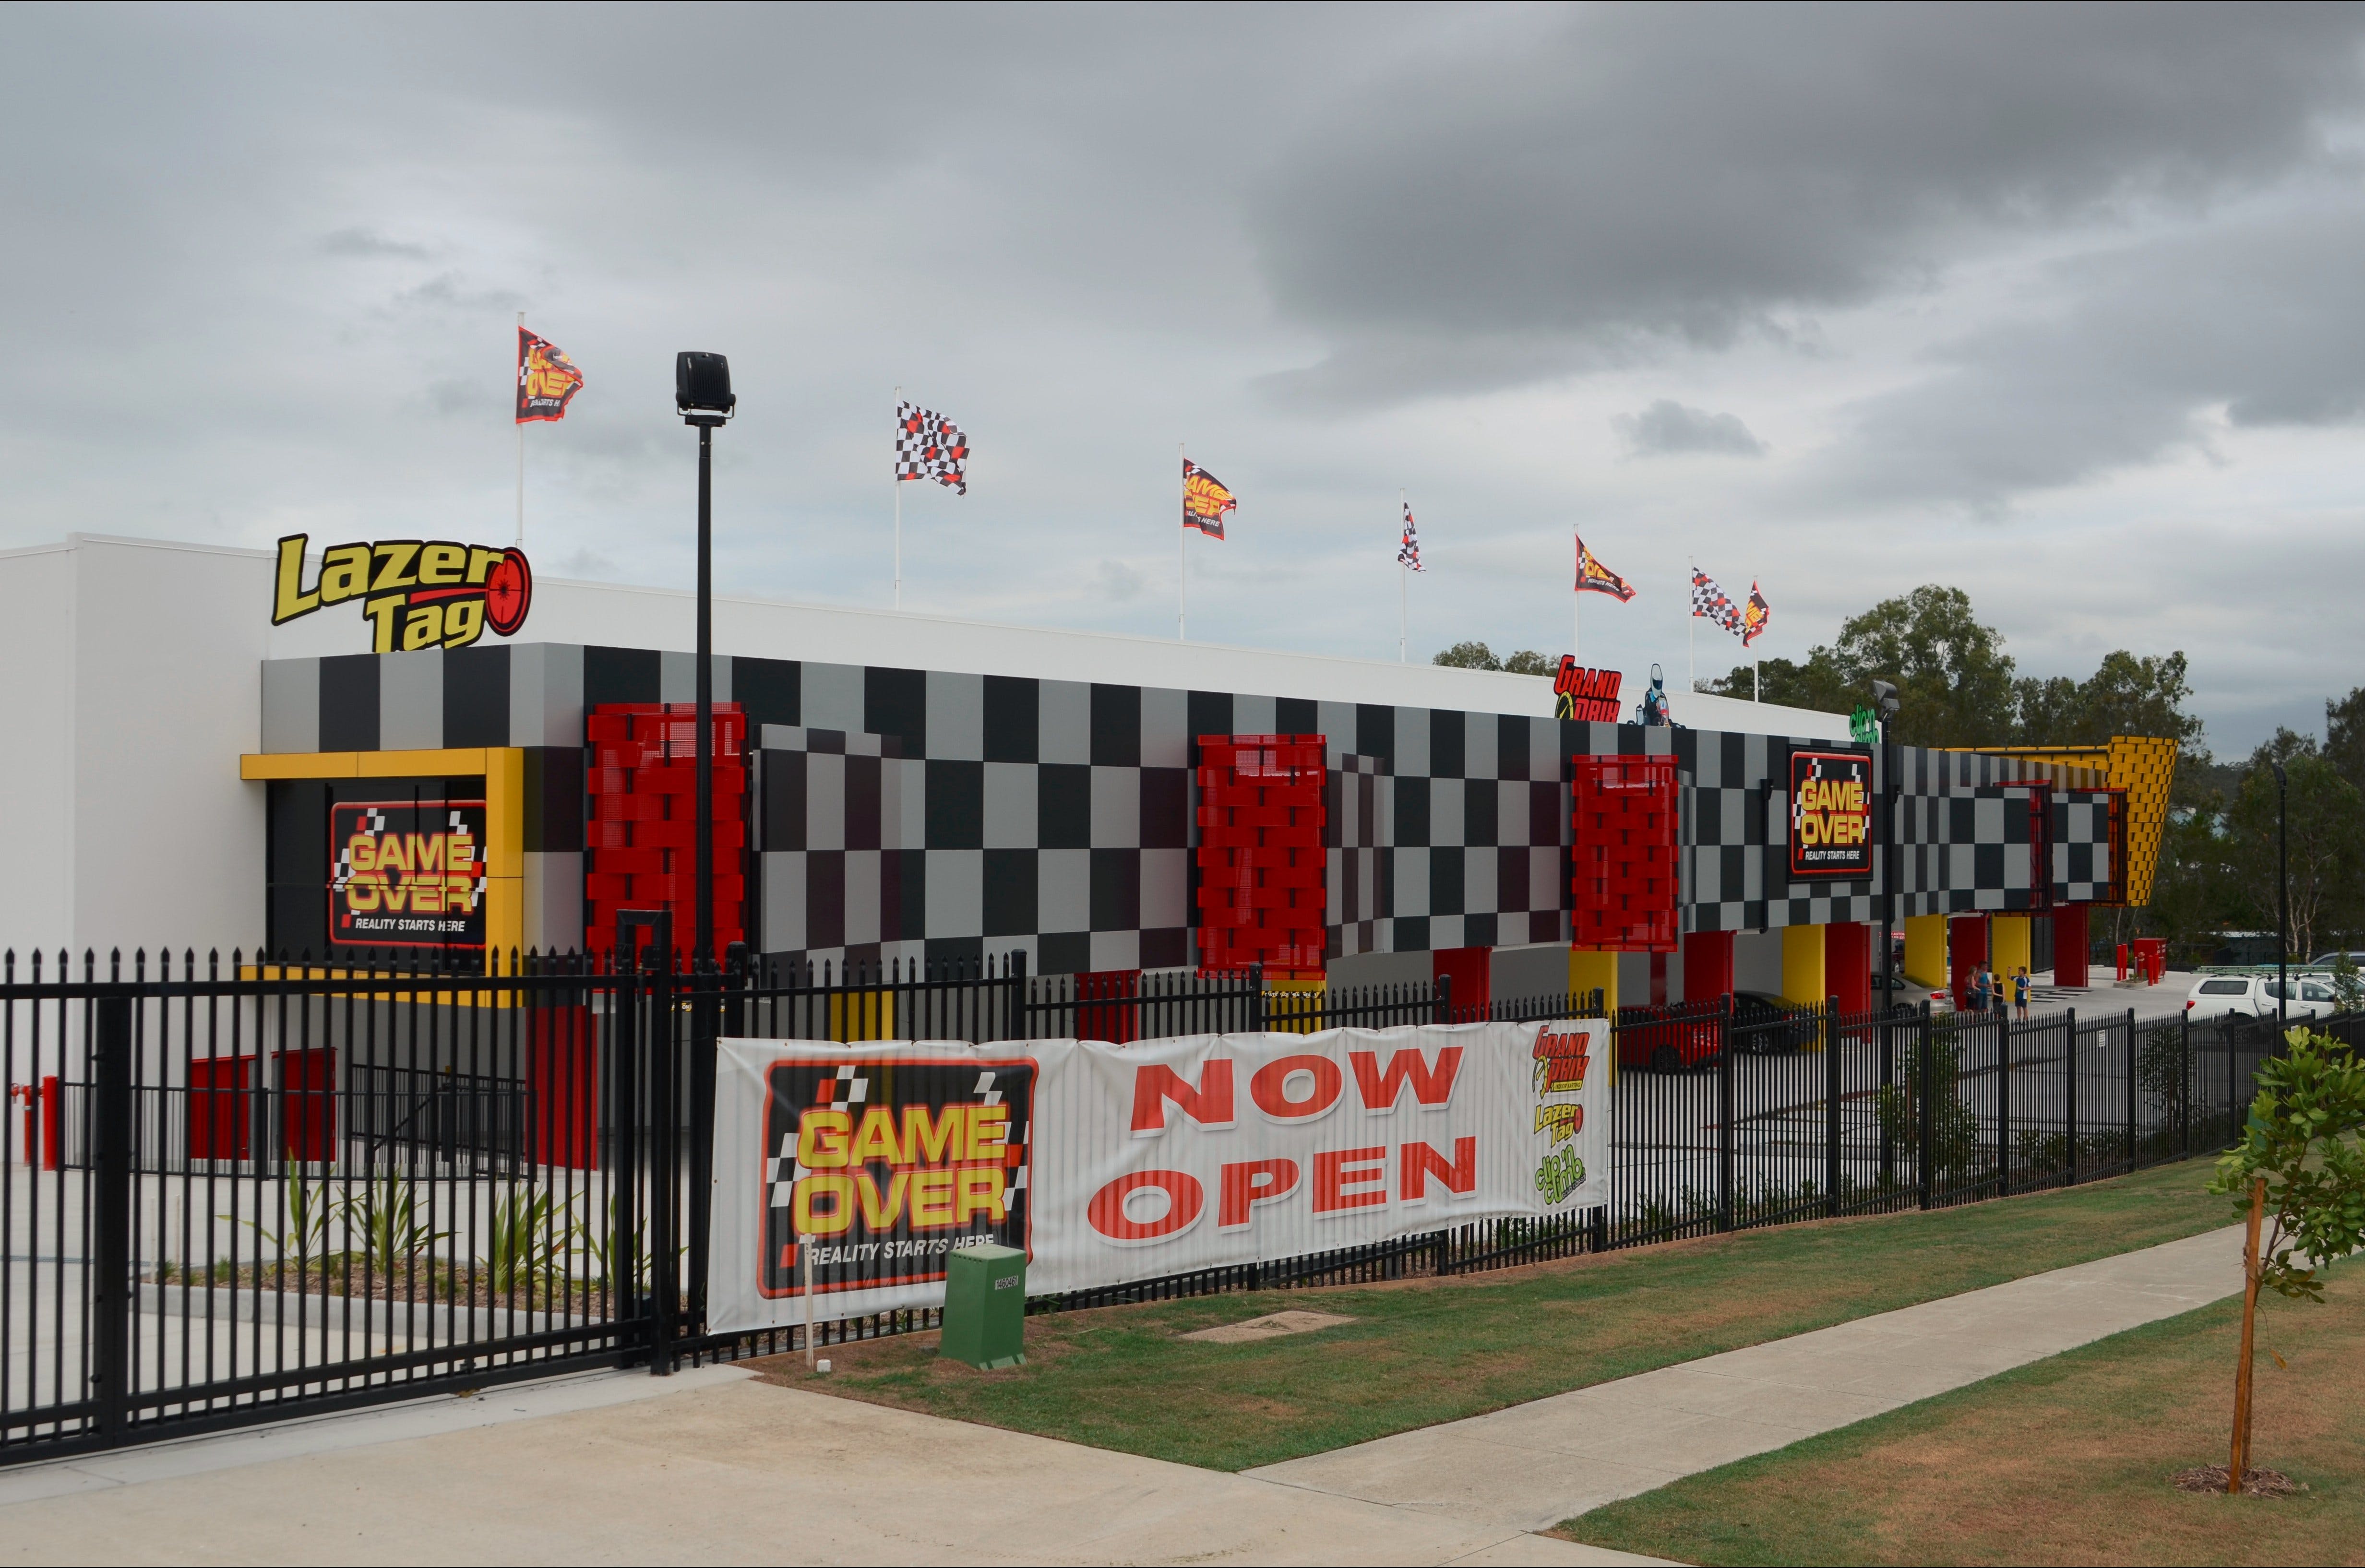 Game Over Indoor Go Karting Adventure Climbing Walls and Lazer Tag Centre - Accommodation Brunswick Heads